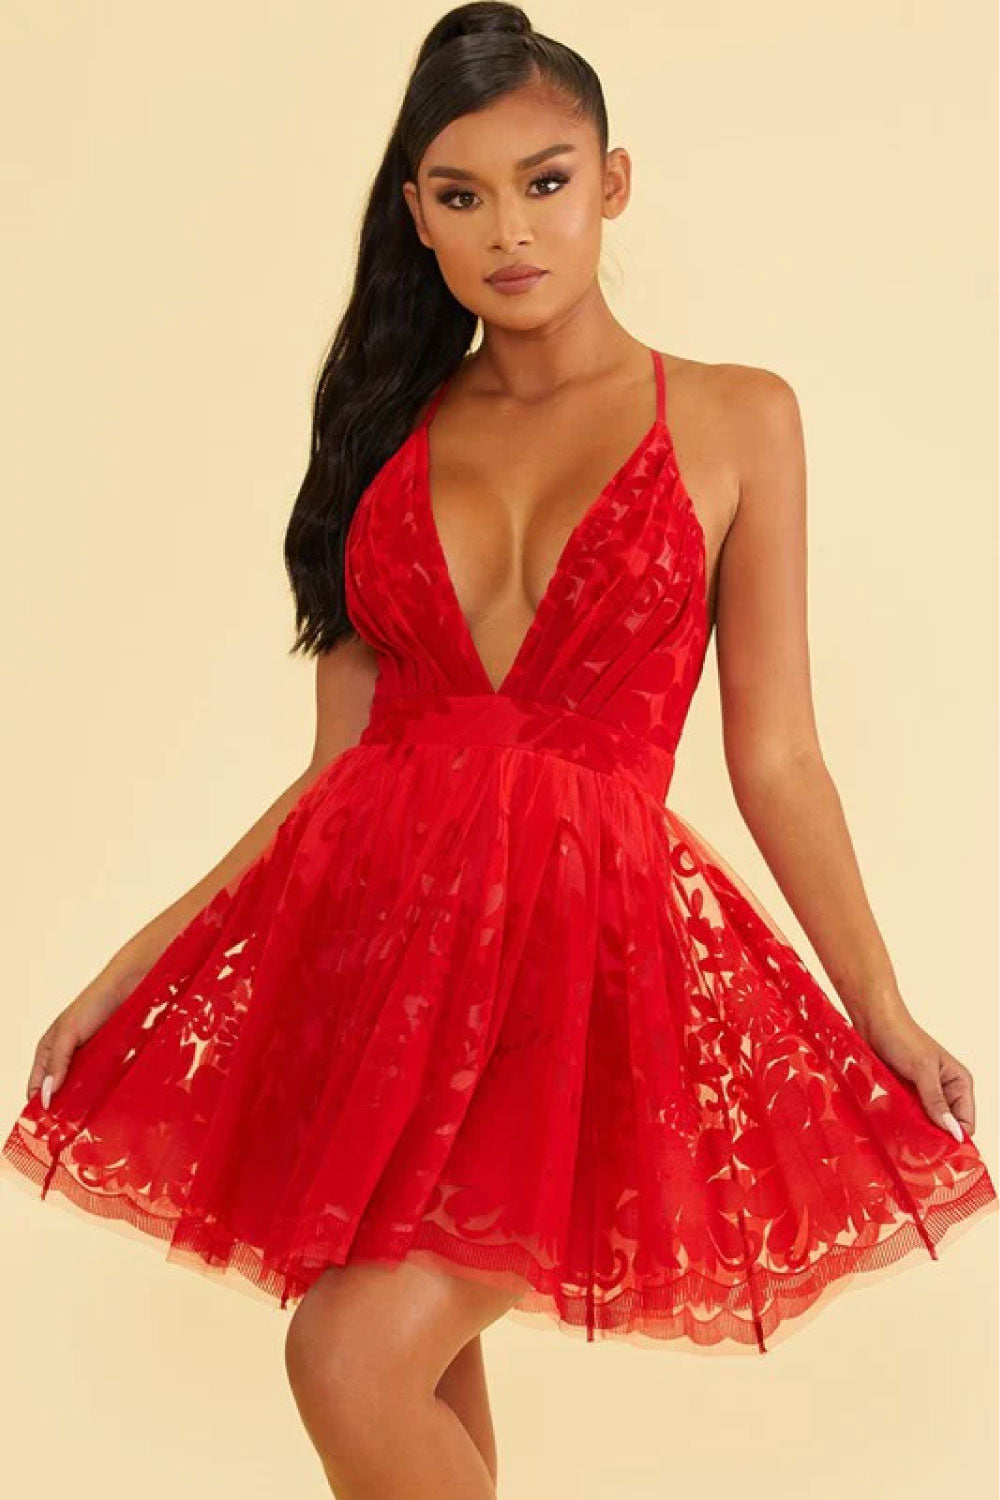 Image of the front of Luxxel's Elegant Lace Mini Dress in Red on a model.